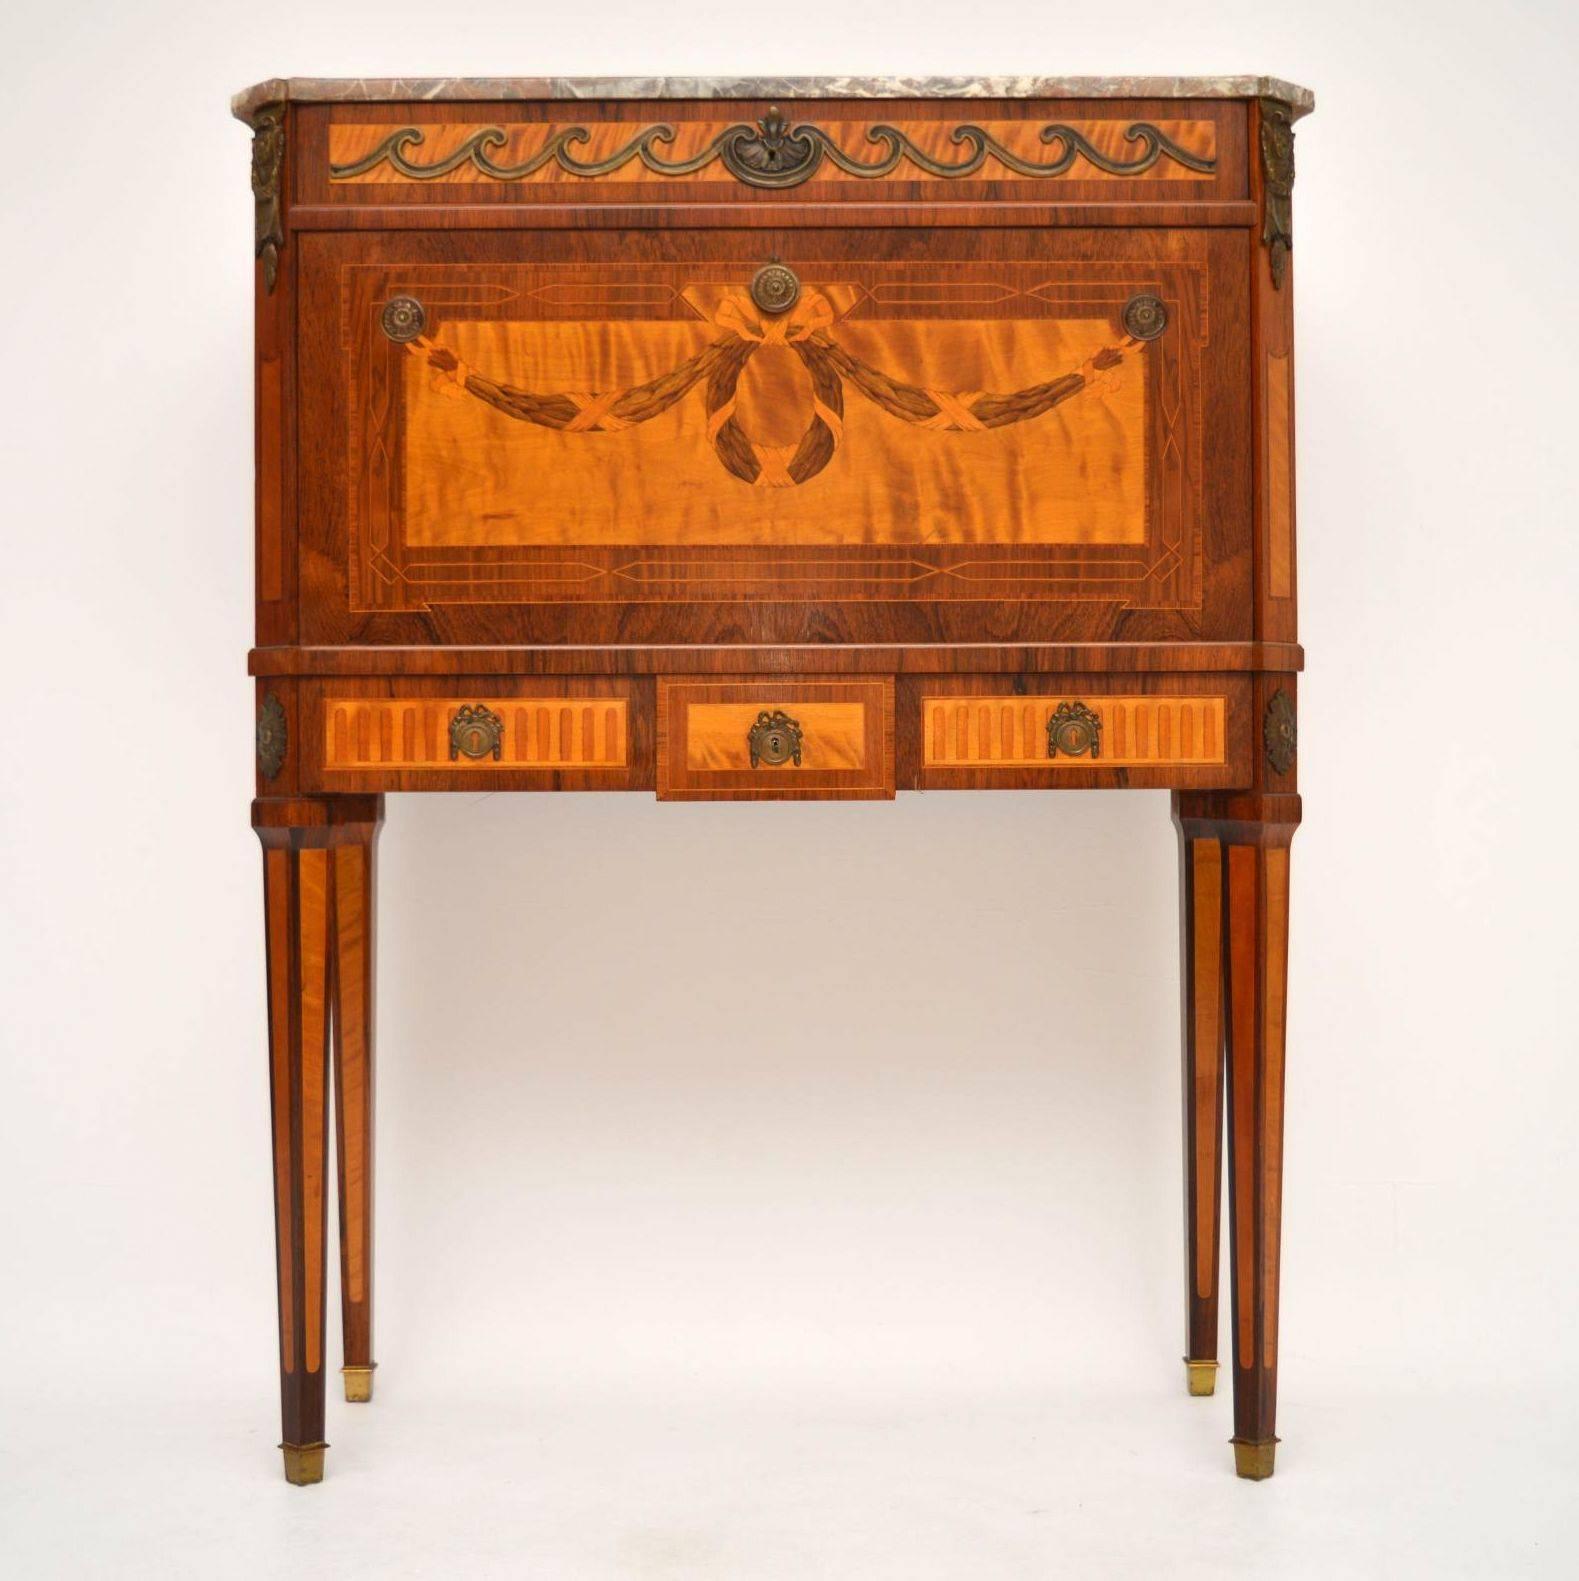 Antique Swedish marble top secretaire cabinet of fine quality with a stunning writing interior. It has a slim top drawer, a pull down writing surface, a bottom drawer and sitting on tapered inlaid legs with brass feet. This is an exceptional piece